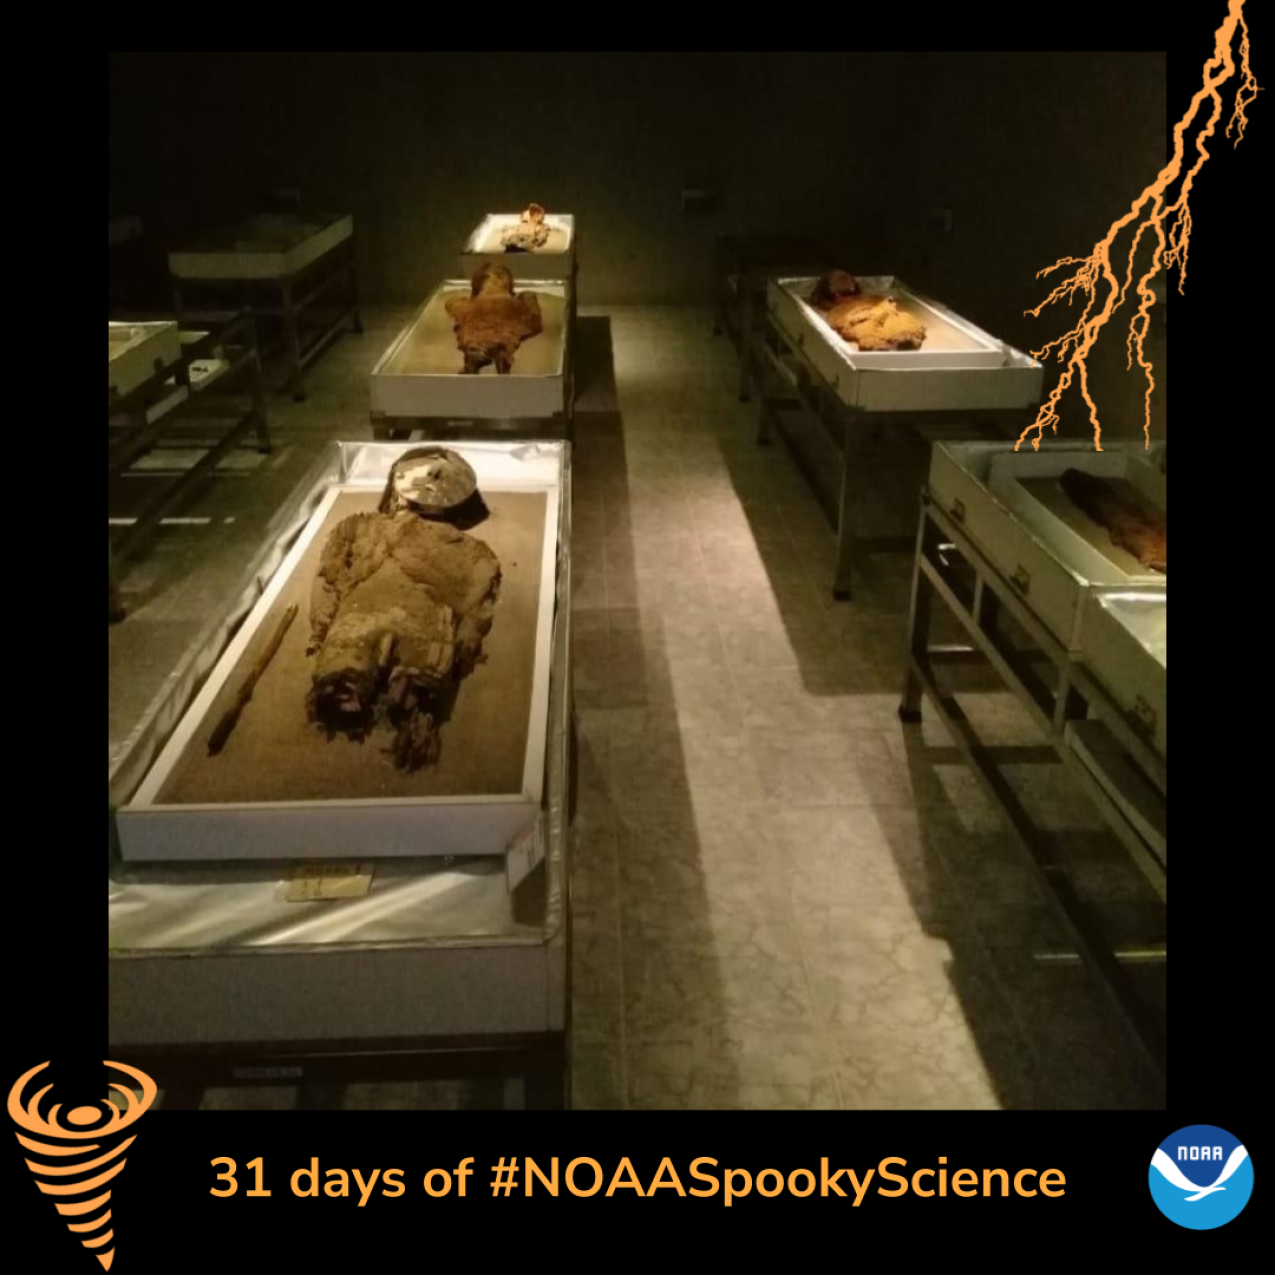 A museum room with mummies displayed on tables. Border of the photo is black with orange atmospheric graphics of a lightning bolt and a tornado. Text: 31 days of #NOAASpookyScience